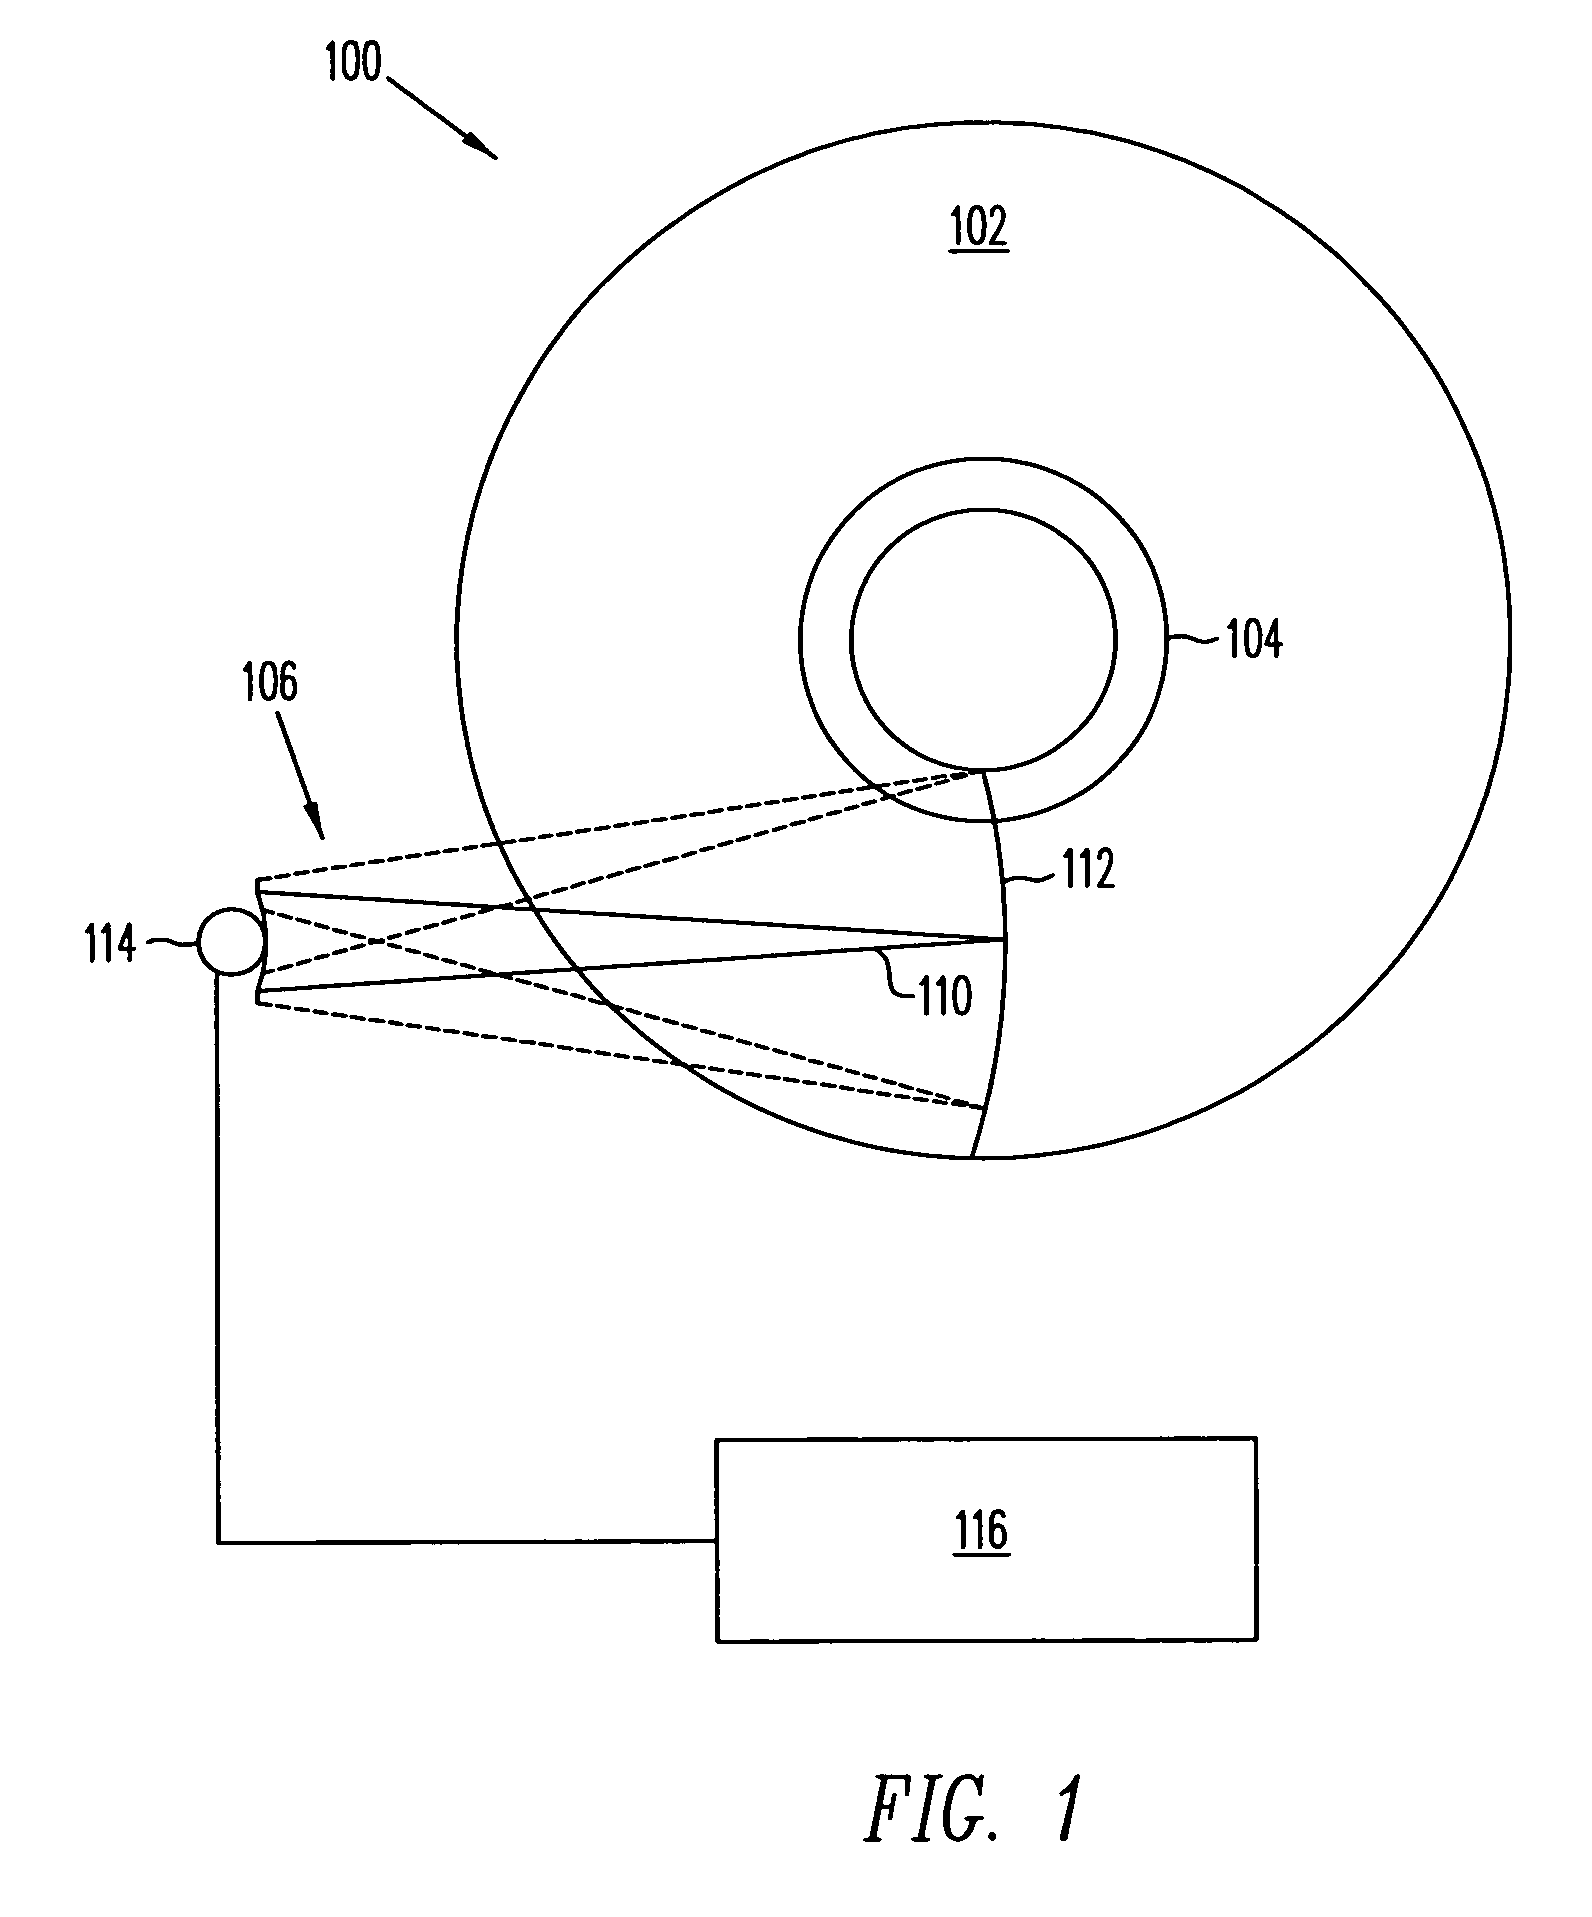 Magnetic recording capping layer with multiple layers for controlling anisotropy for perpendicular recording media